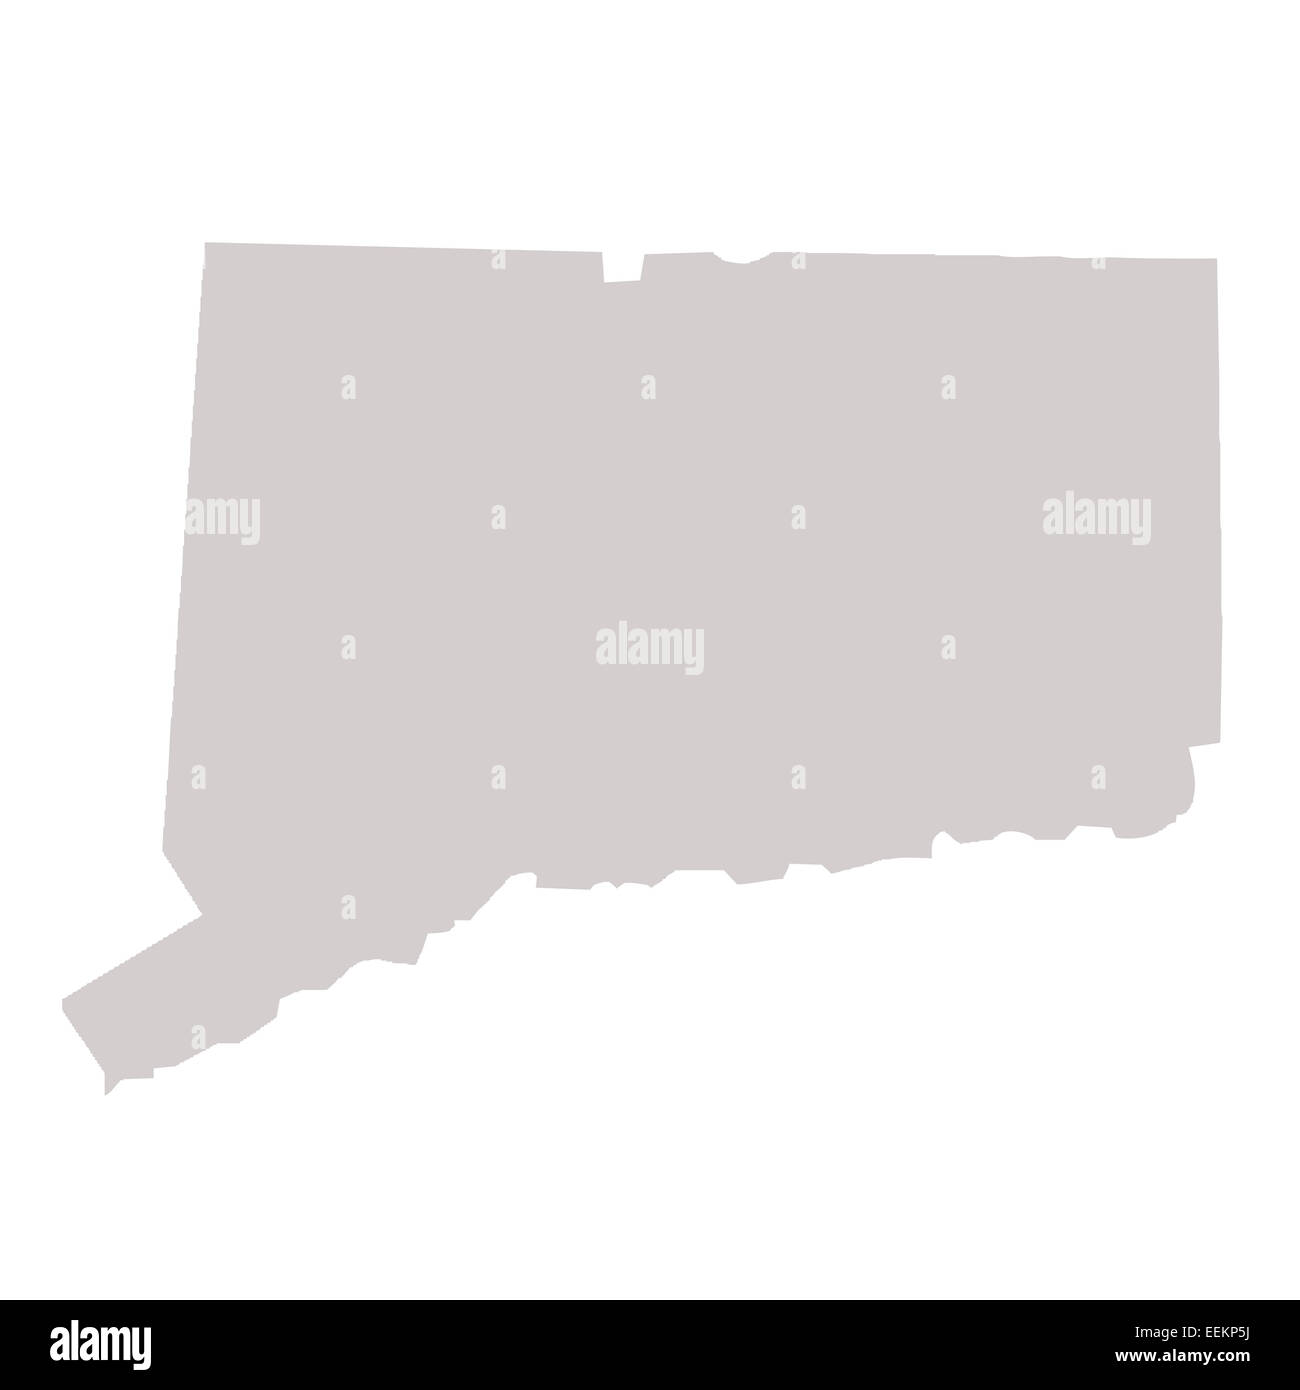 Connecticut State map isolated on a white background, USA. Stock Photo